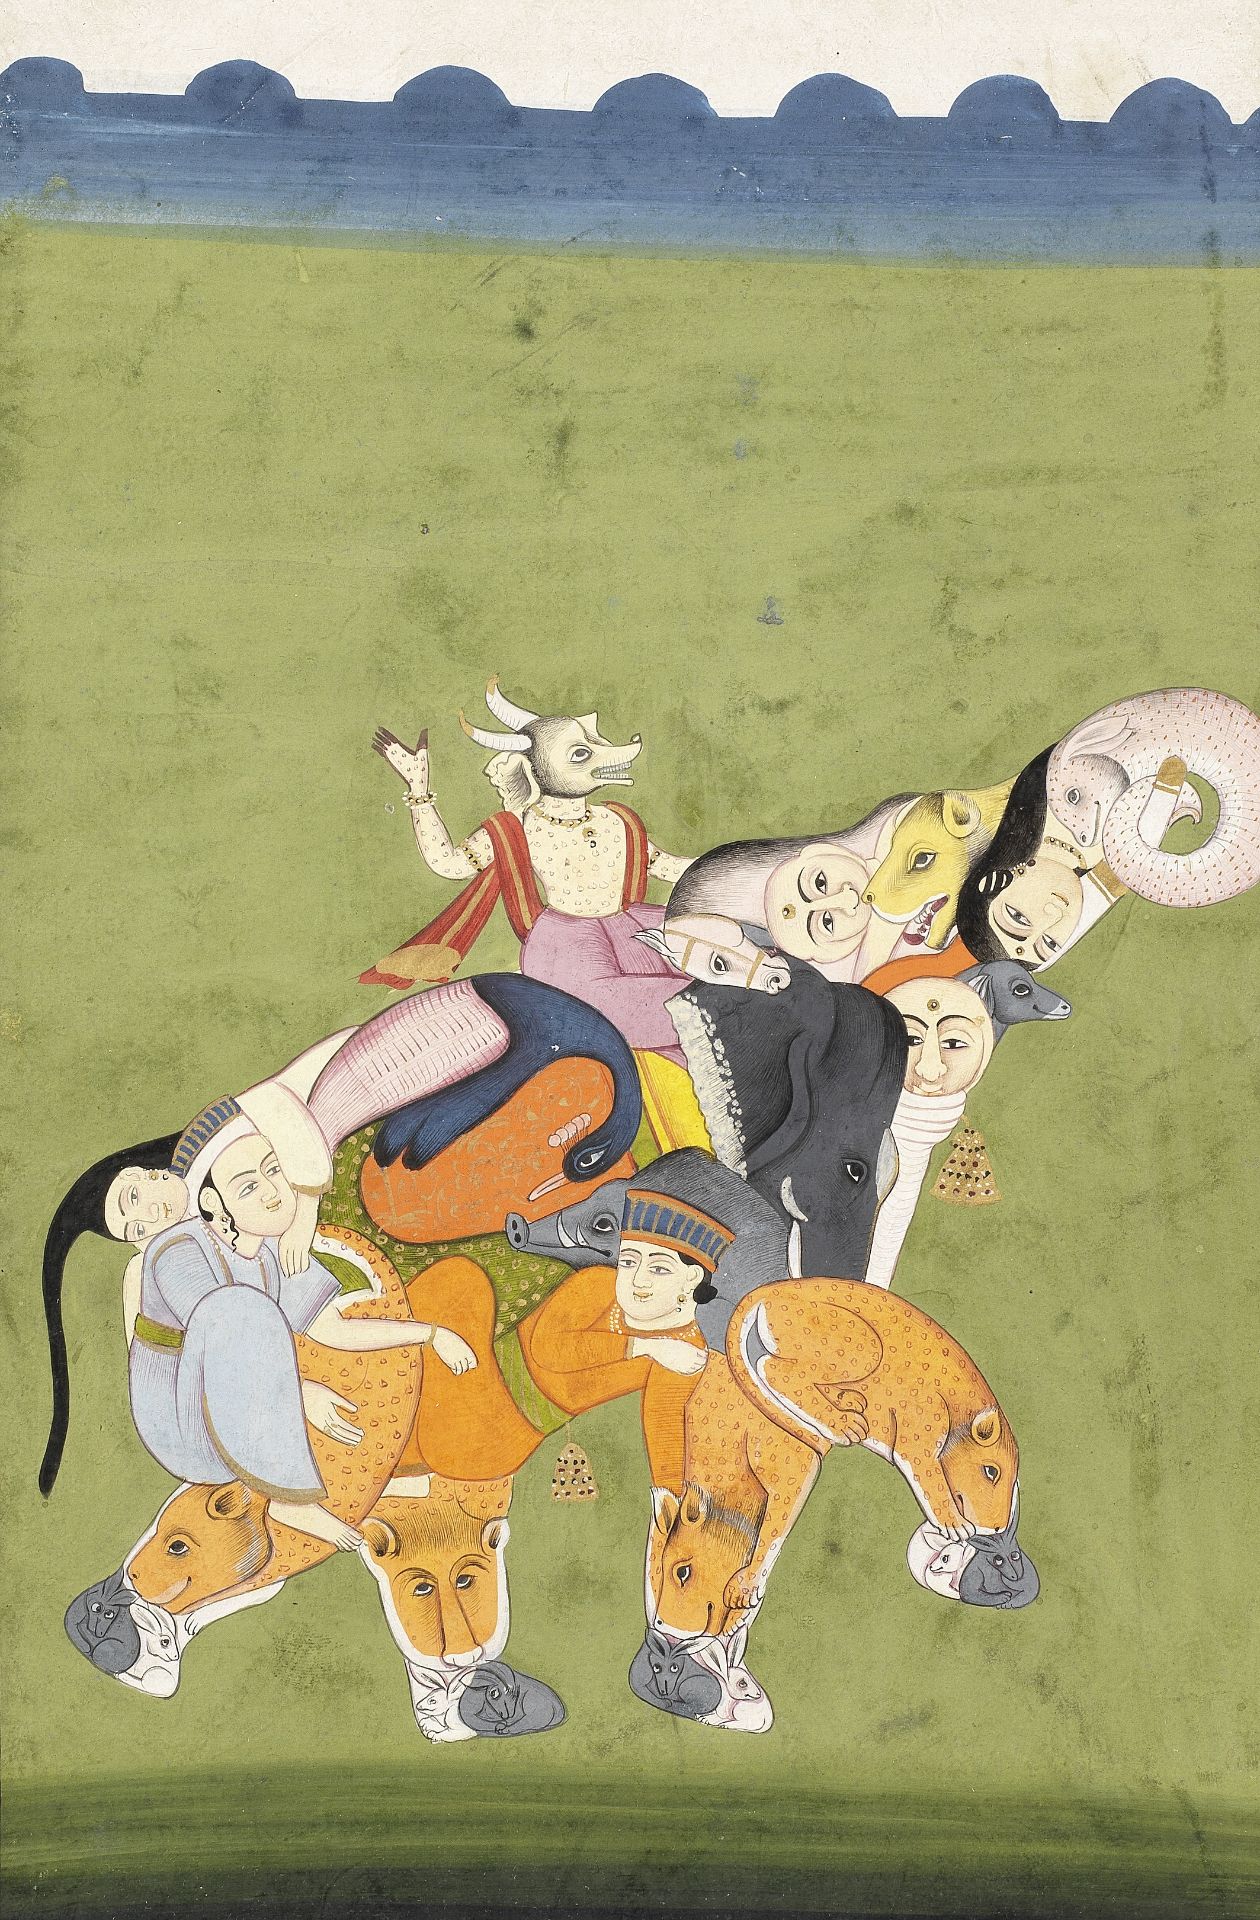 A composite elephant ridden by a demon Rajasthan, probably Jodhpur, early 19th Century